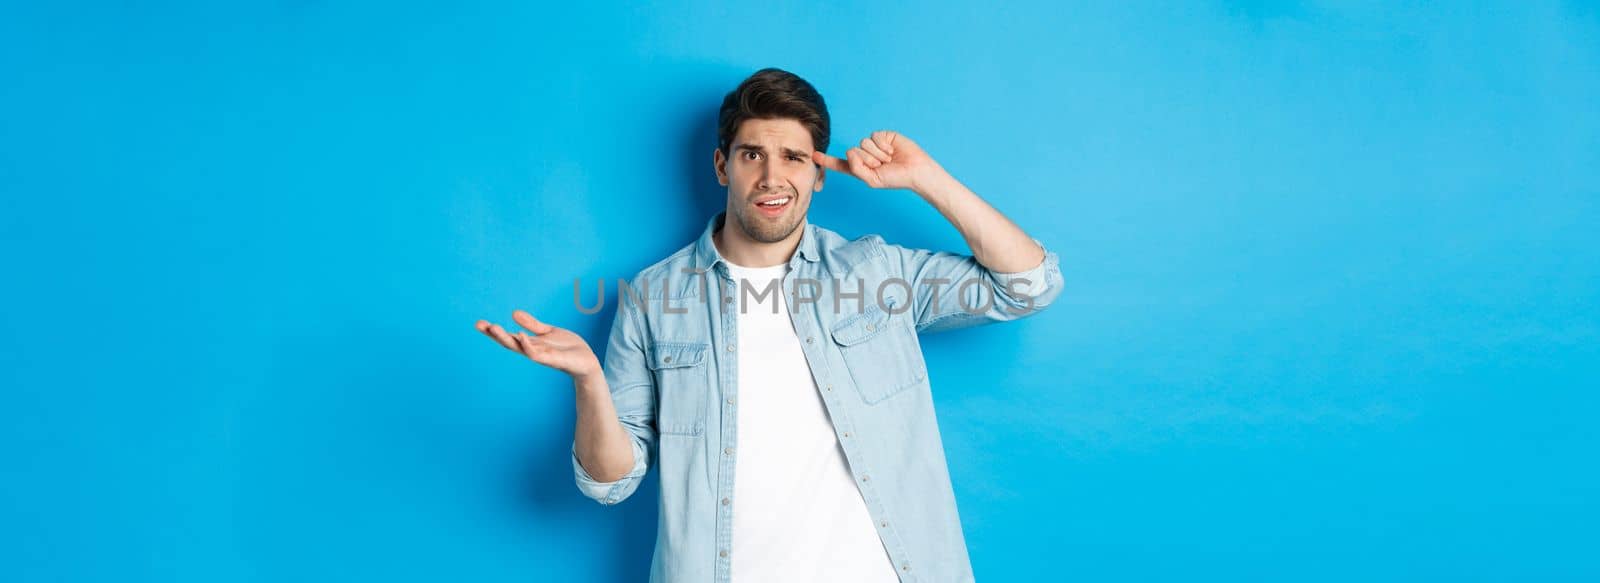 Confused man scolding person for being stupid, pointing finger at head and shrugging, looking puzzled, disapprove actions, standing against blue background.